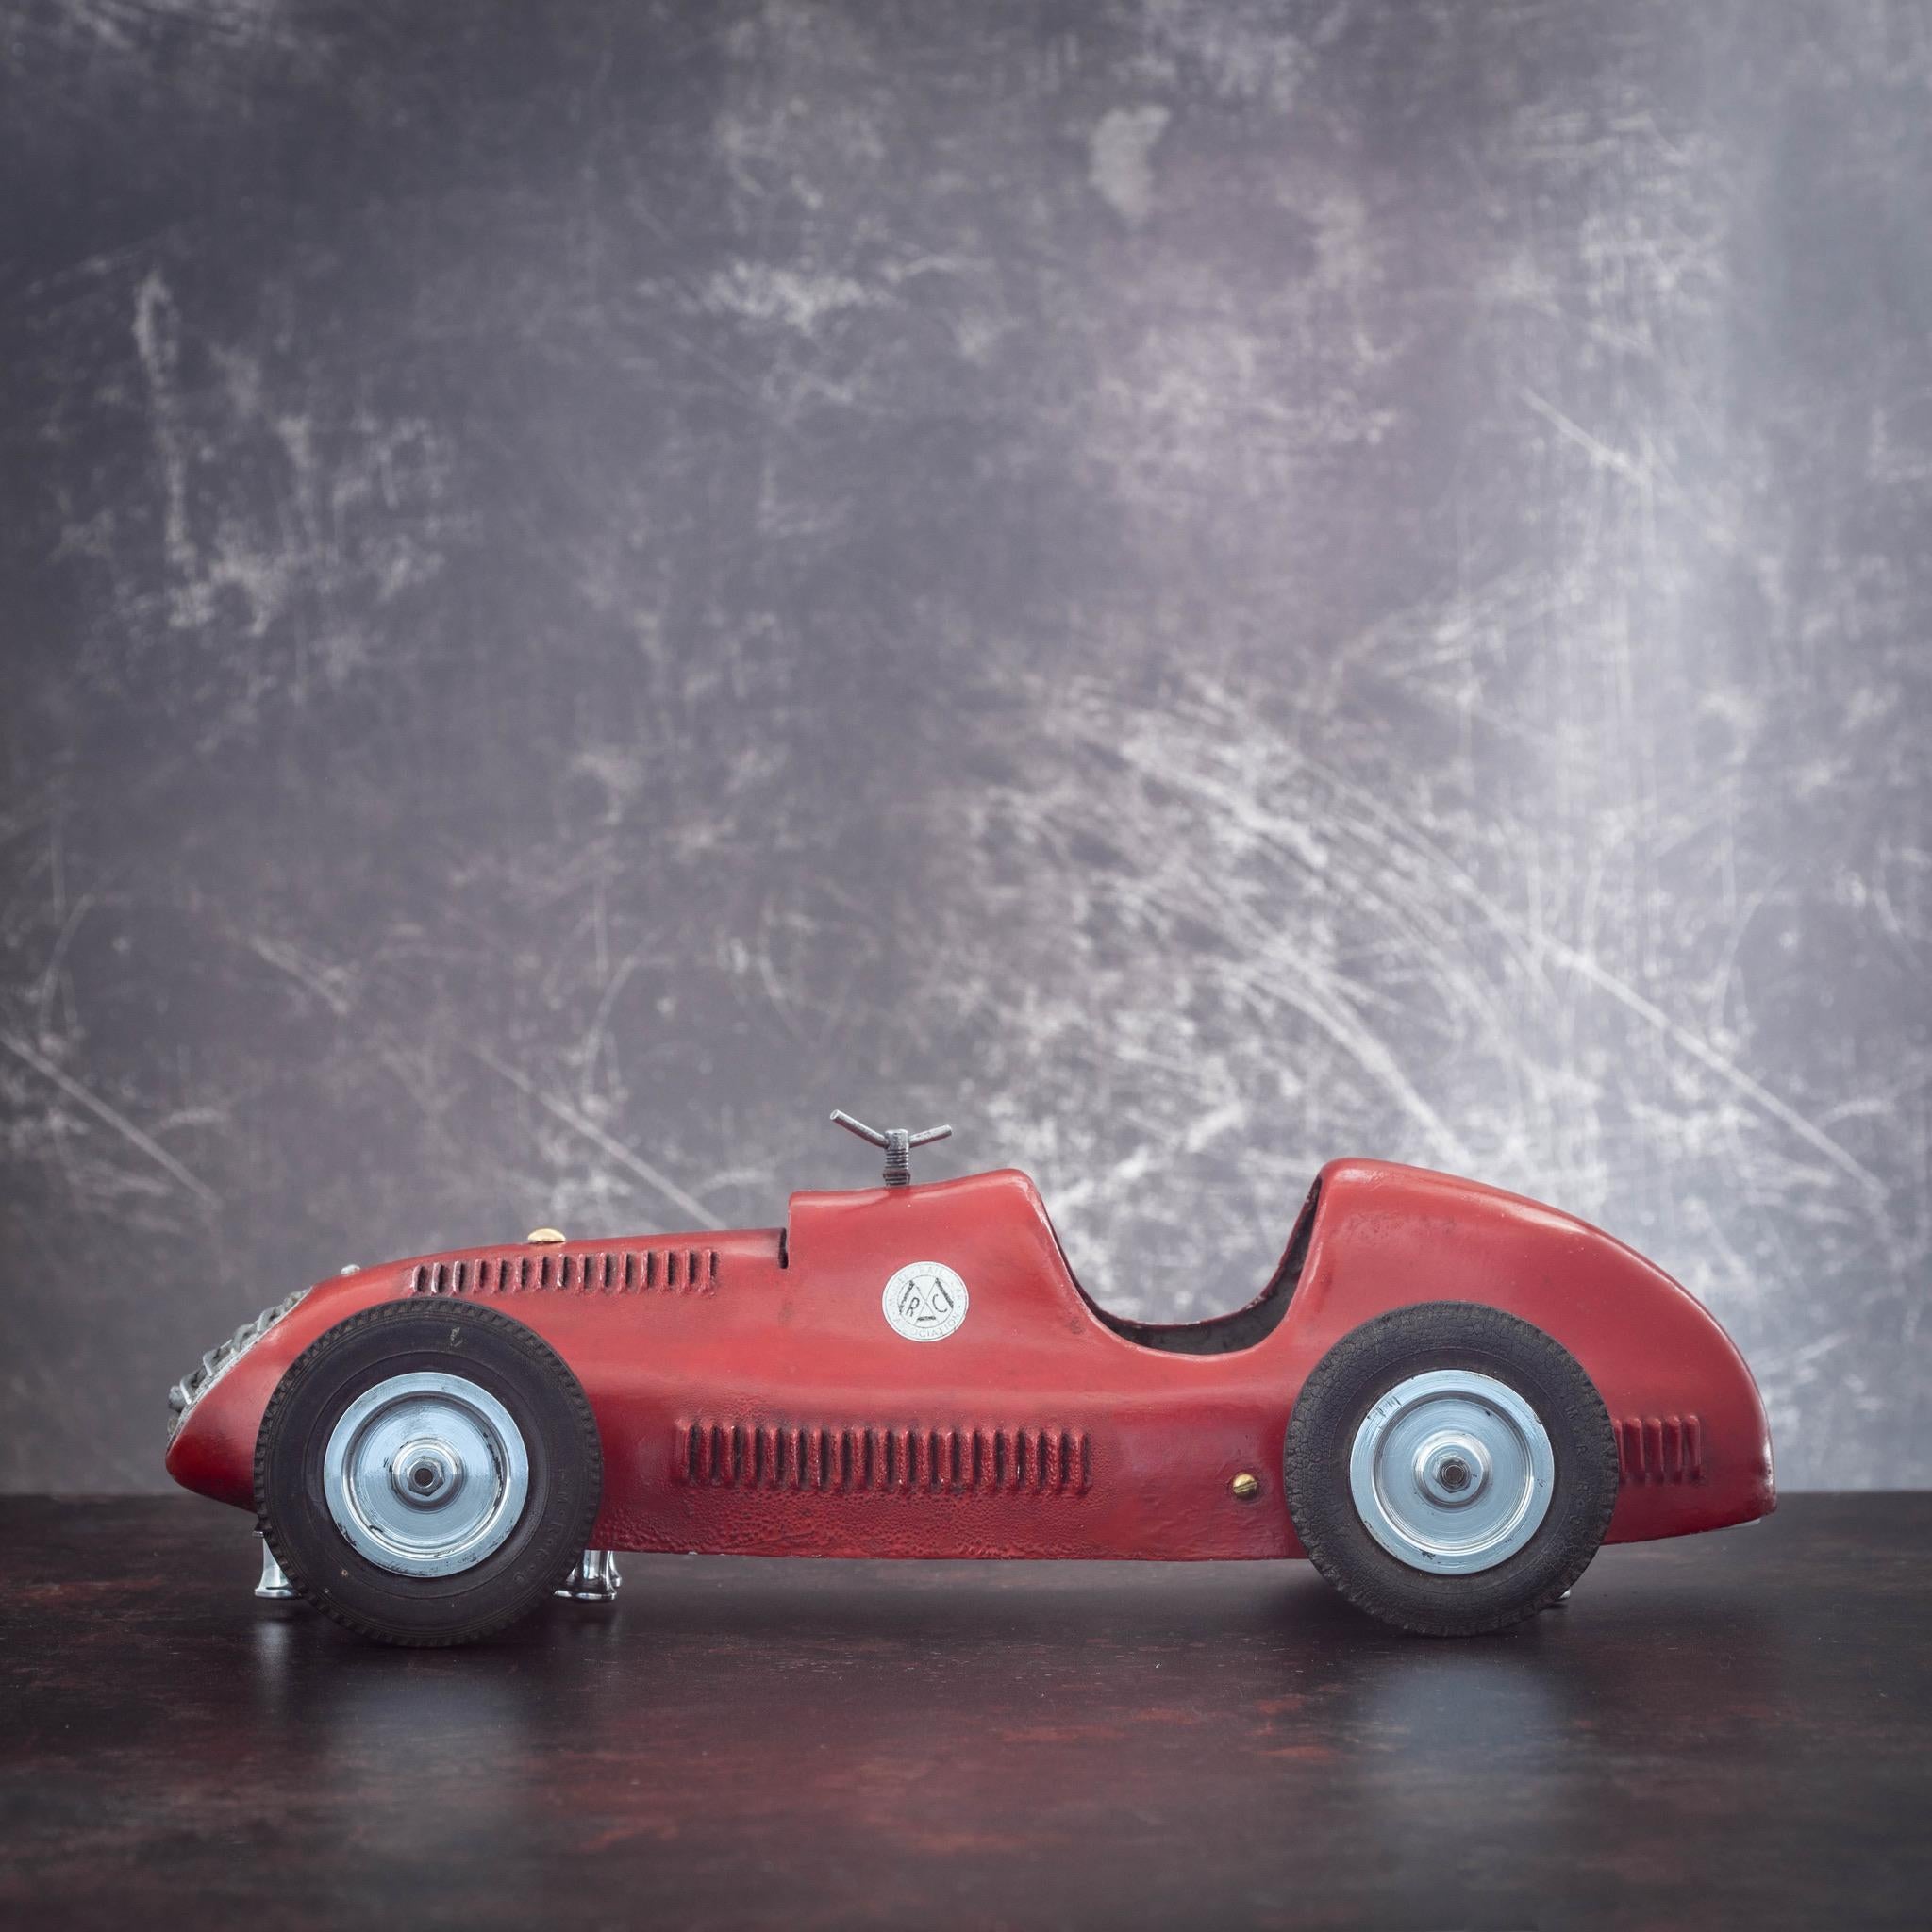 Fabulous scratch built model race car, circa 1952. A track car, such as this one, raced on the surface of a board track usually consisting of 4-6 lanes.

Constructed with an aluminium floor pan and skilfully crafted one piece sheet metal body that